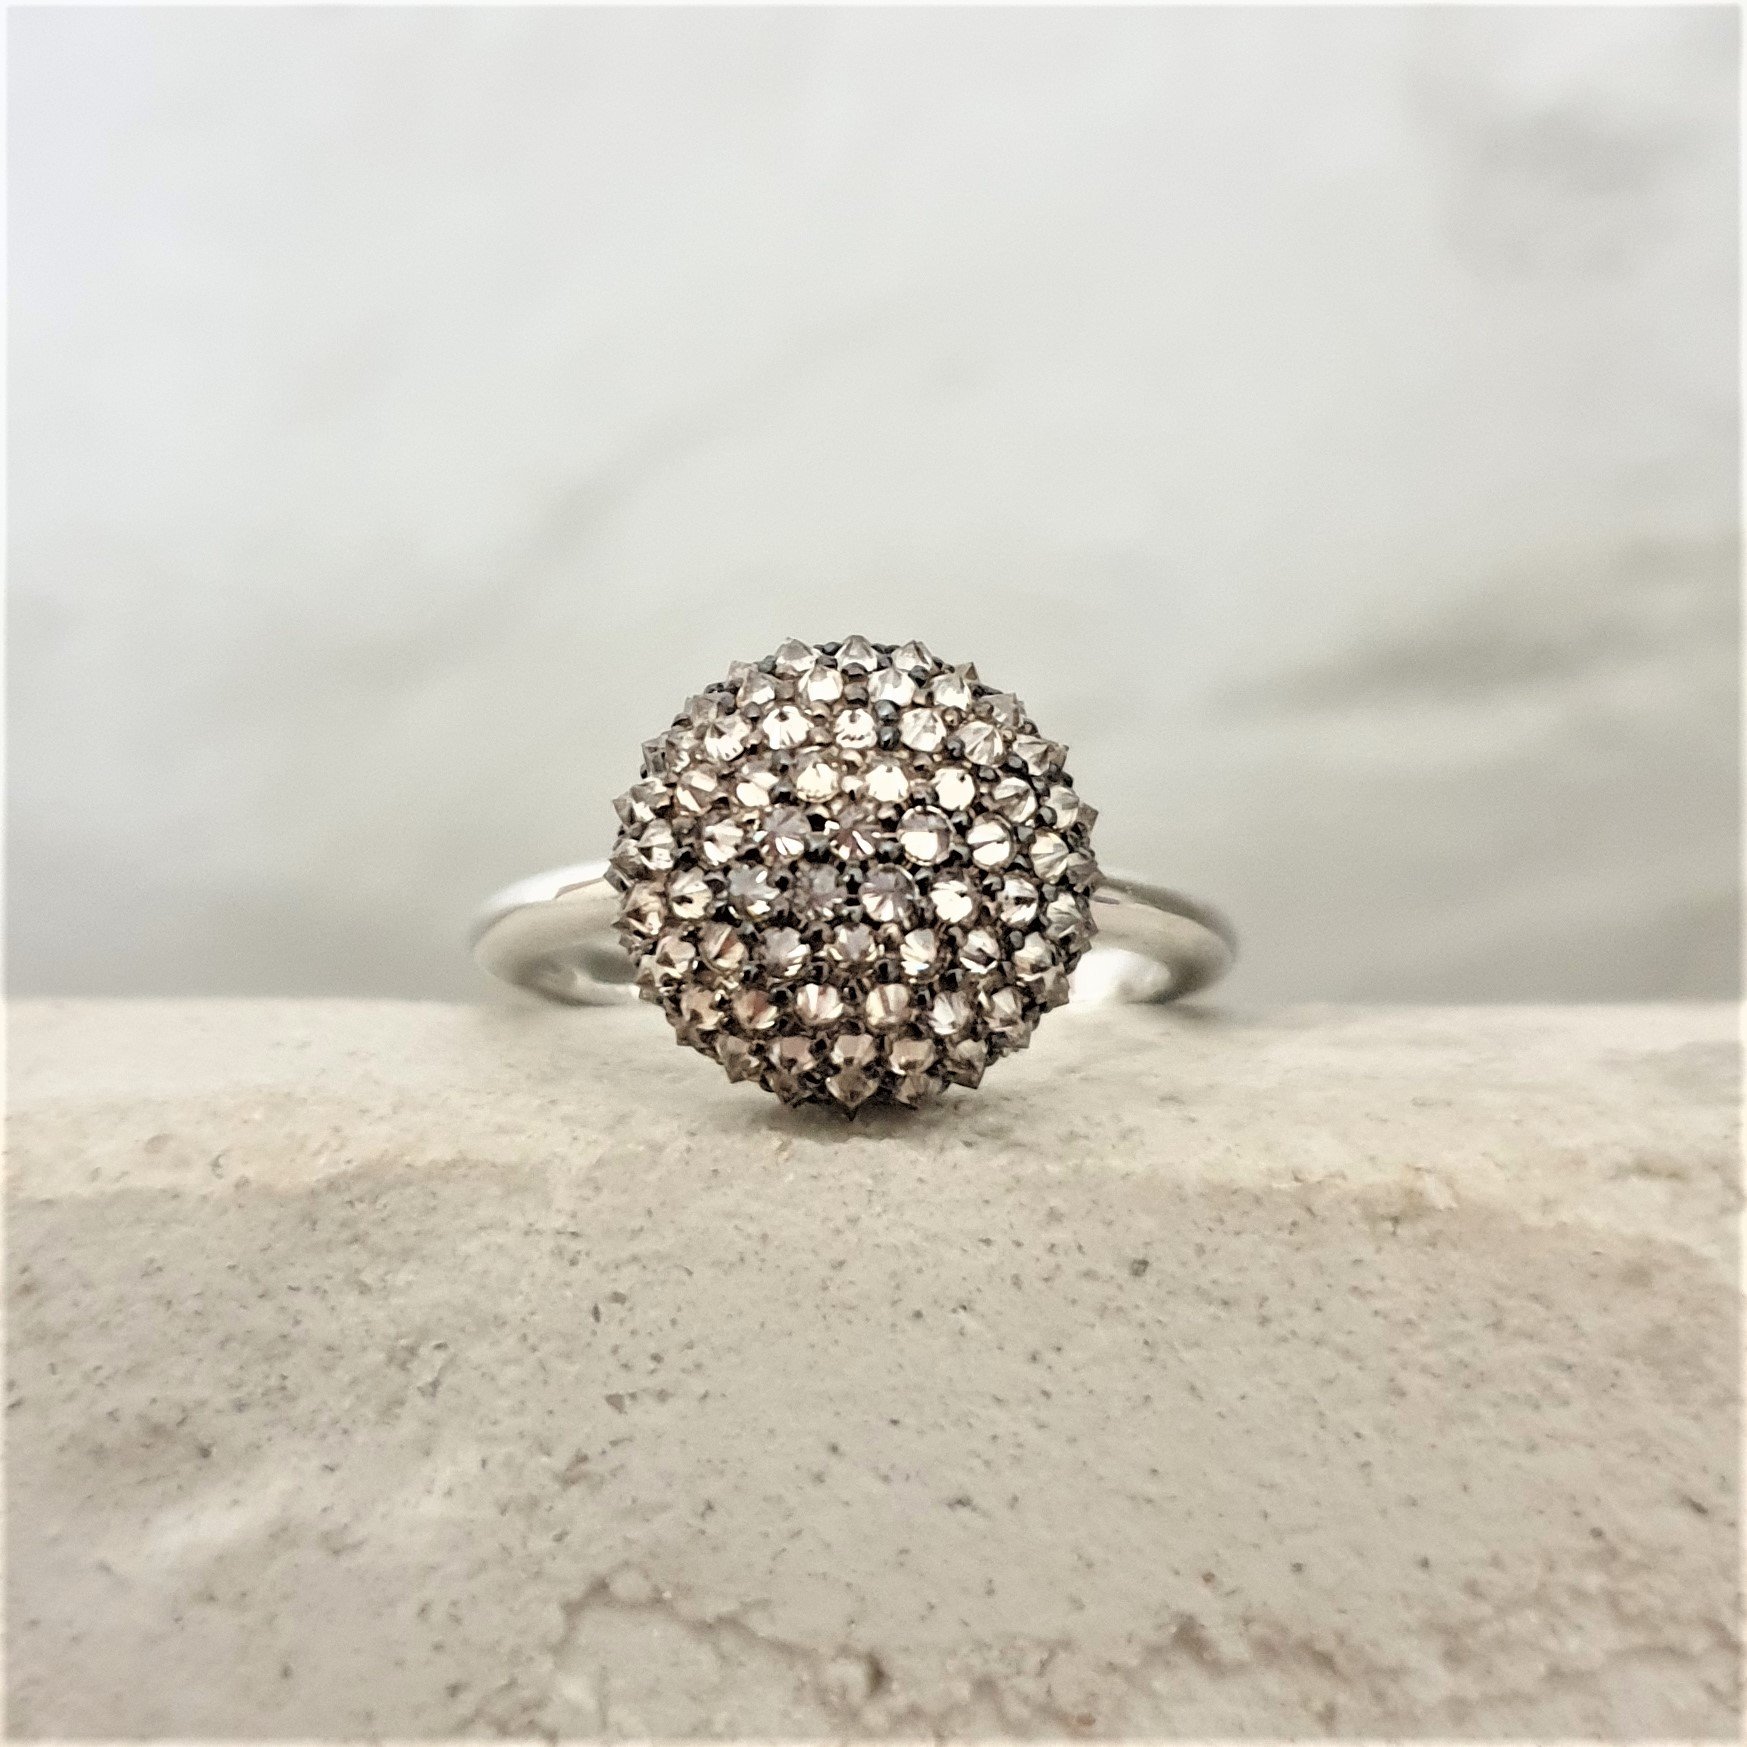 RING K18 WHITE GOLD WITH STONES BRILLIANT